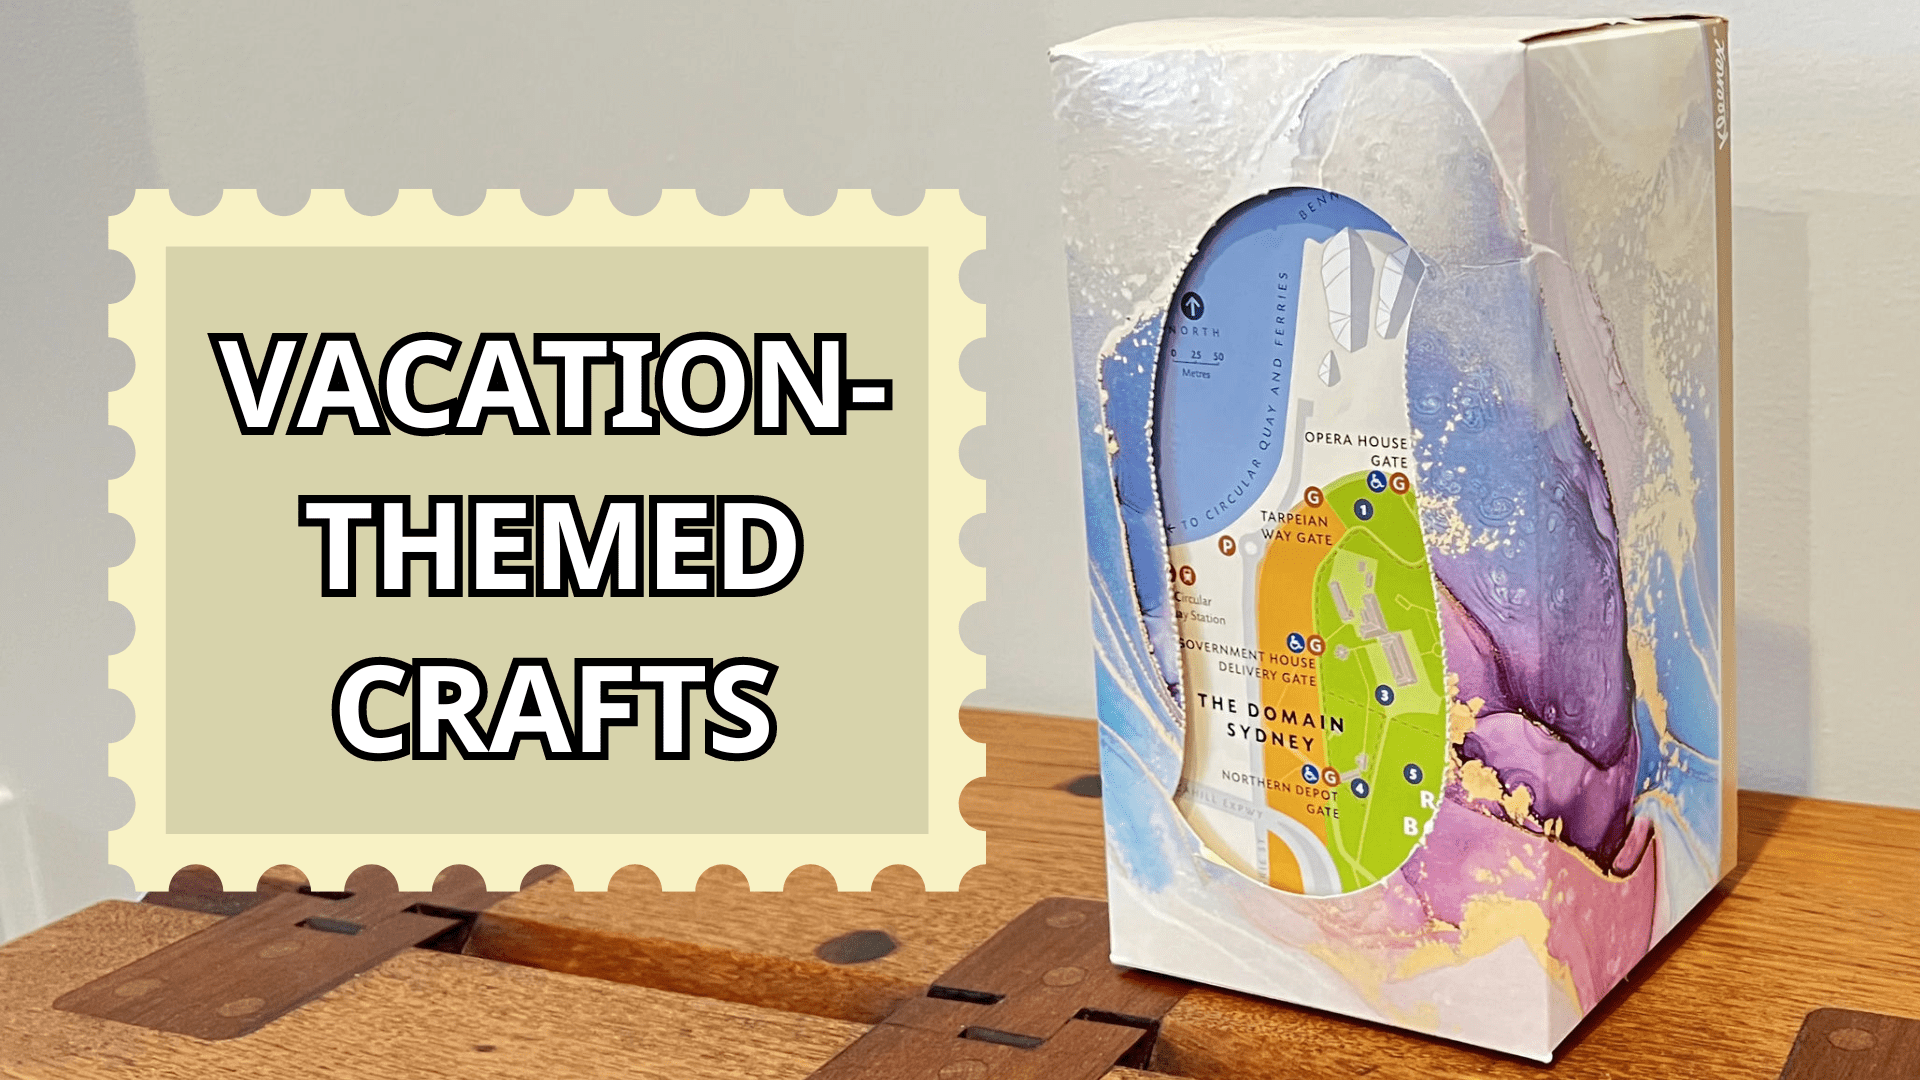 A map of Sydney, Australia / Gadigal Country inside a tissue box craft. The text "Vacation-Themed Crafts" inside a stamp. This introduces our vacation-themed crafts for kids.